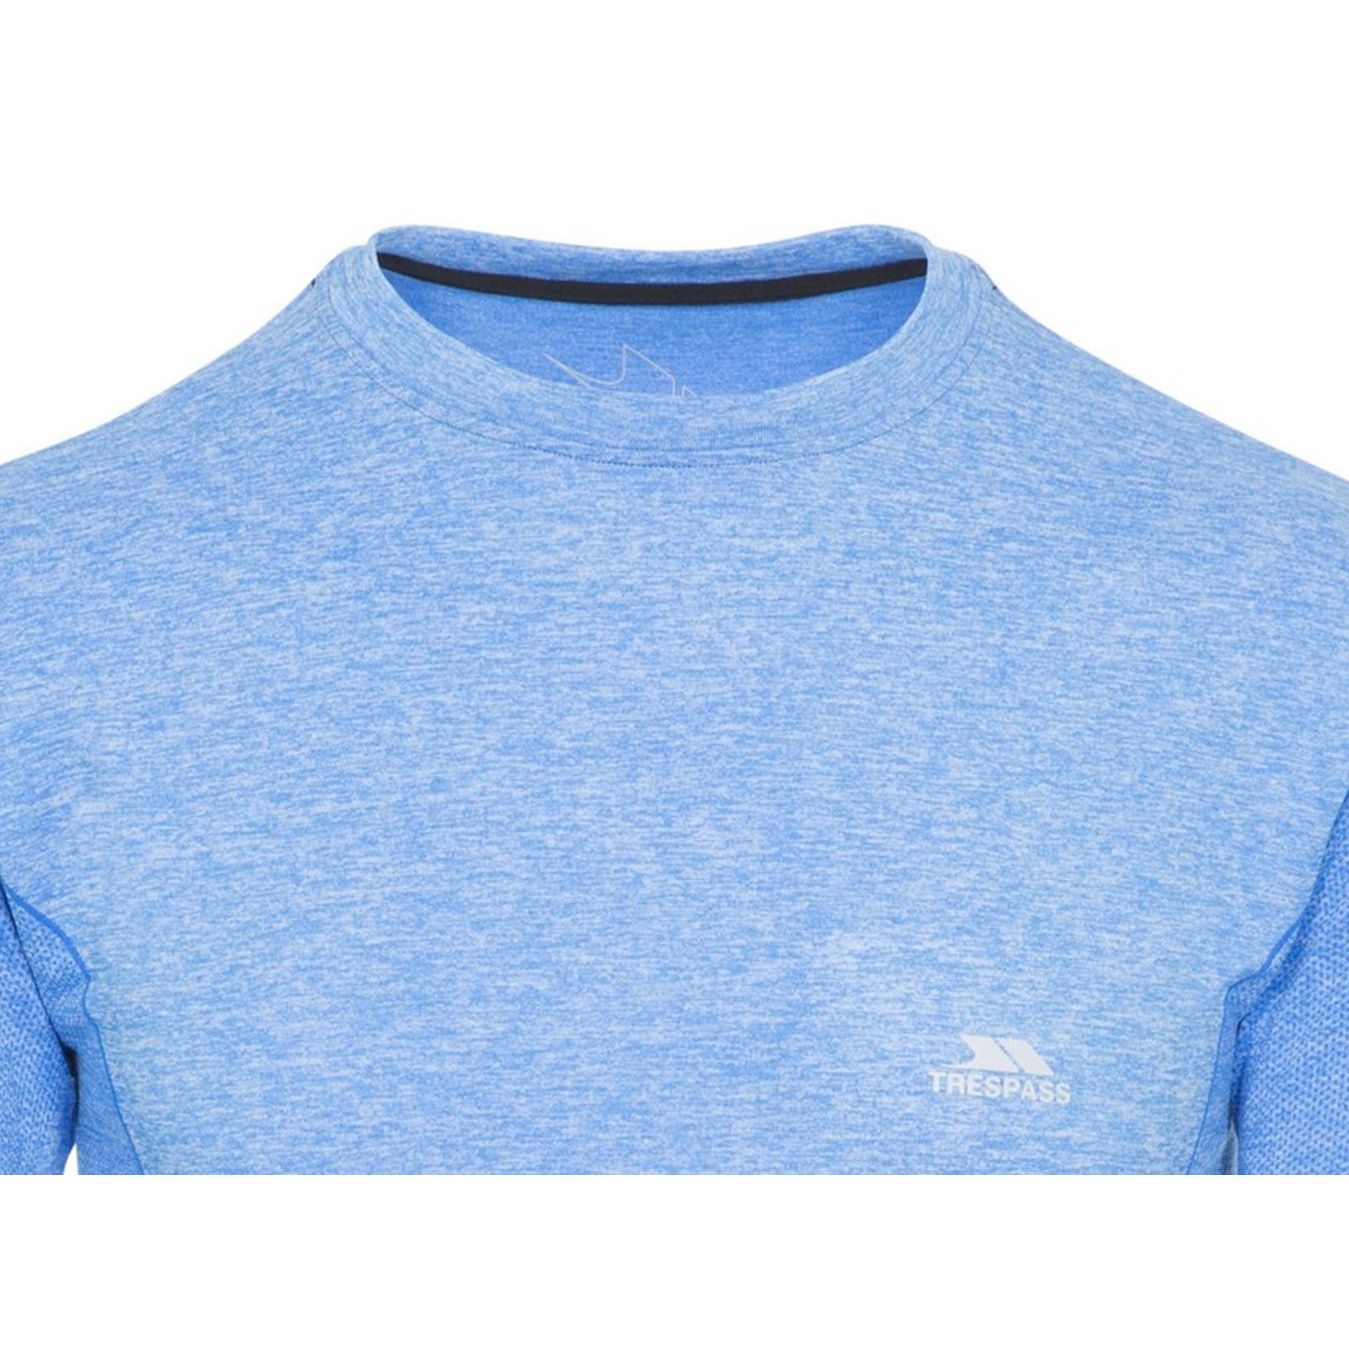 Seamless. Long sleeve. Round neck. Contrast panels. Reflective printed logos.  finish. Wicking. Quick dry. 59% Polyamide/36% Polyester/5% Elastane. Trespass Mens Chest Sizing (approx): S - 35-37in/89-94cm, M - 38-40in/96.5-101.5cm, L - 41-43in/104-109cm, XL - 44-46in/111.5-117cm, XXL - 46-48in/117-122cm, 3XL - 48-50in/122-127cm.